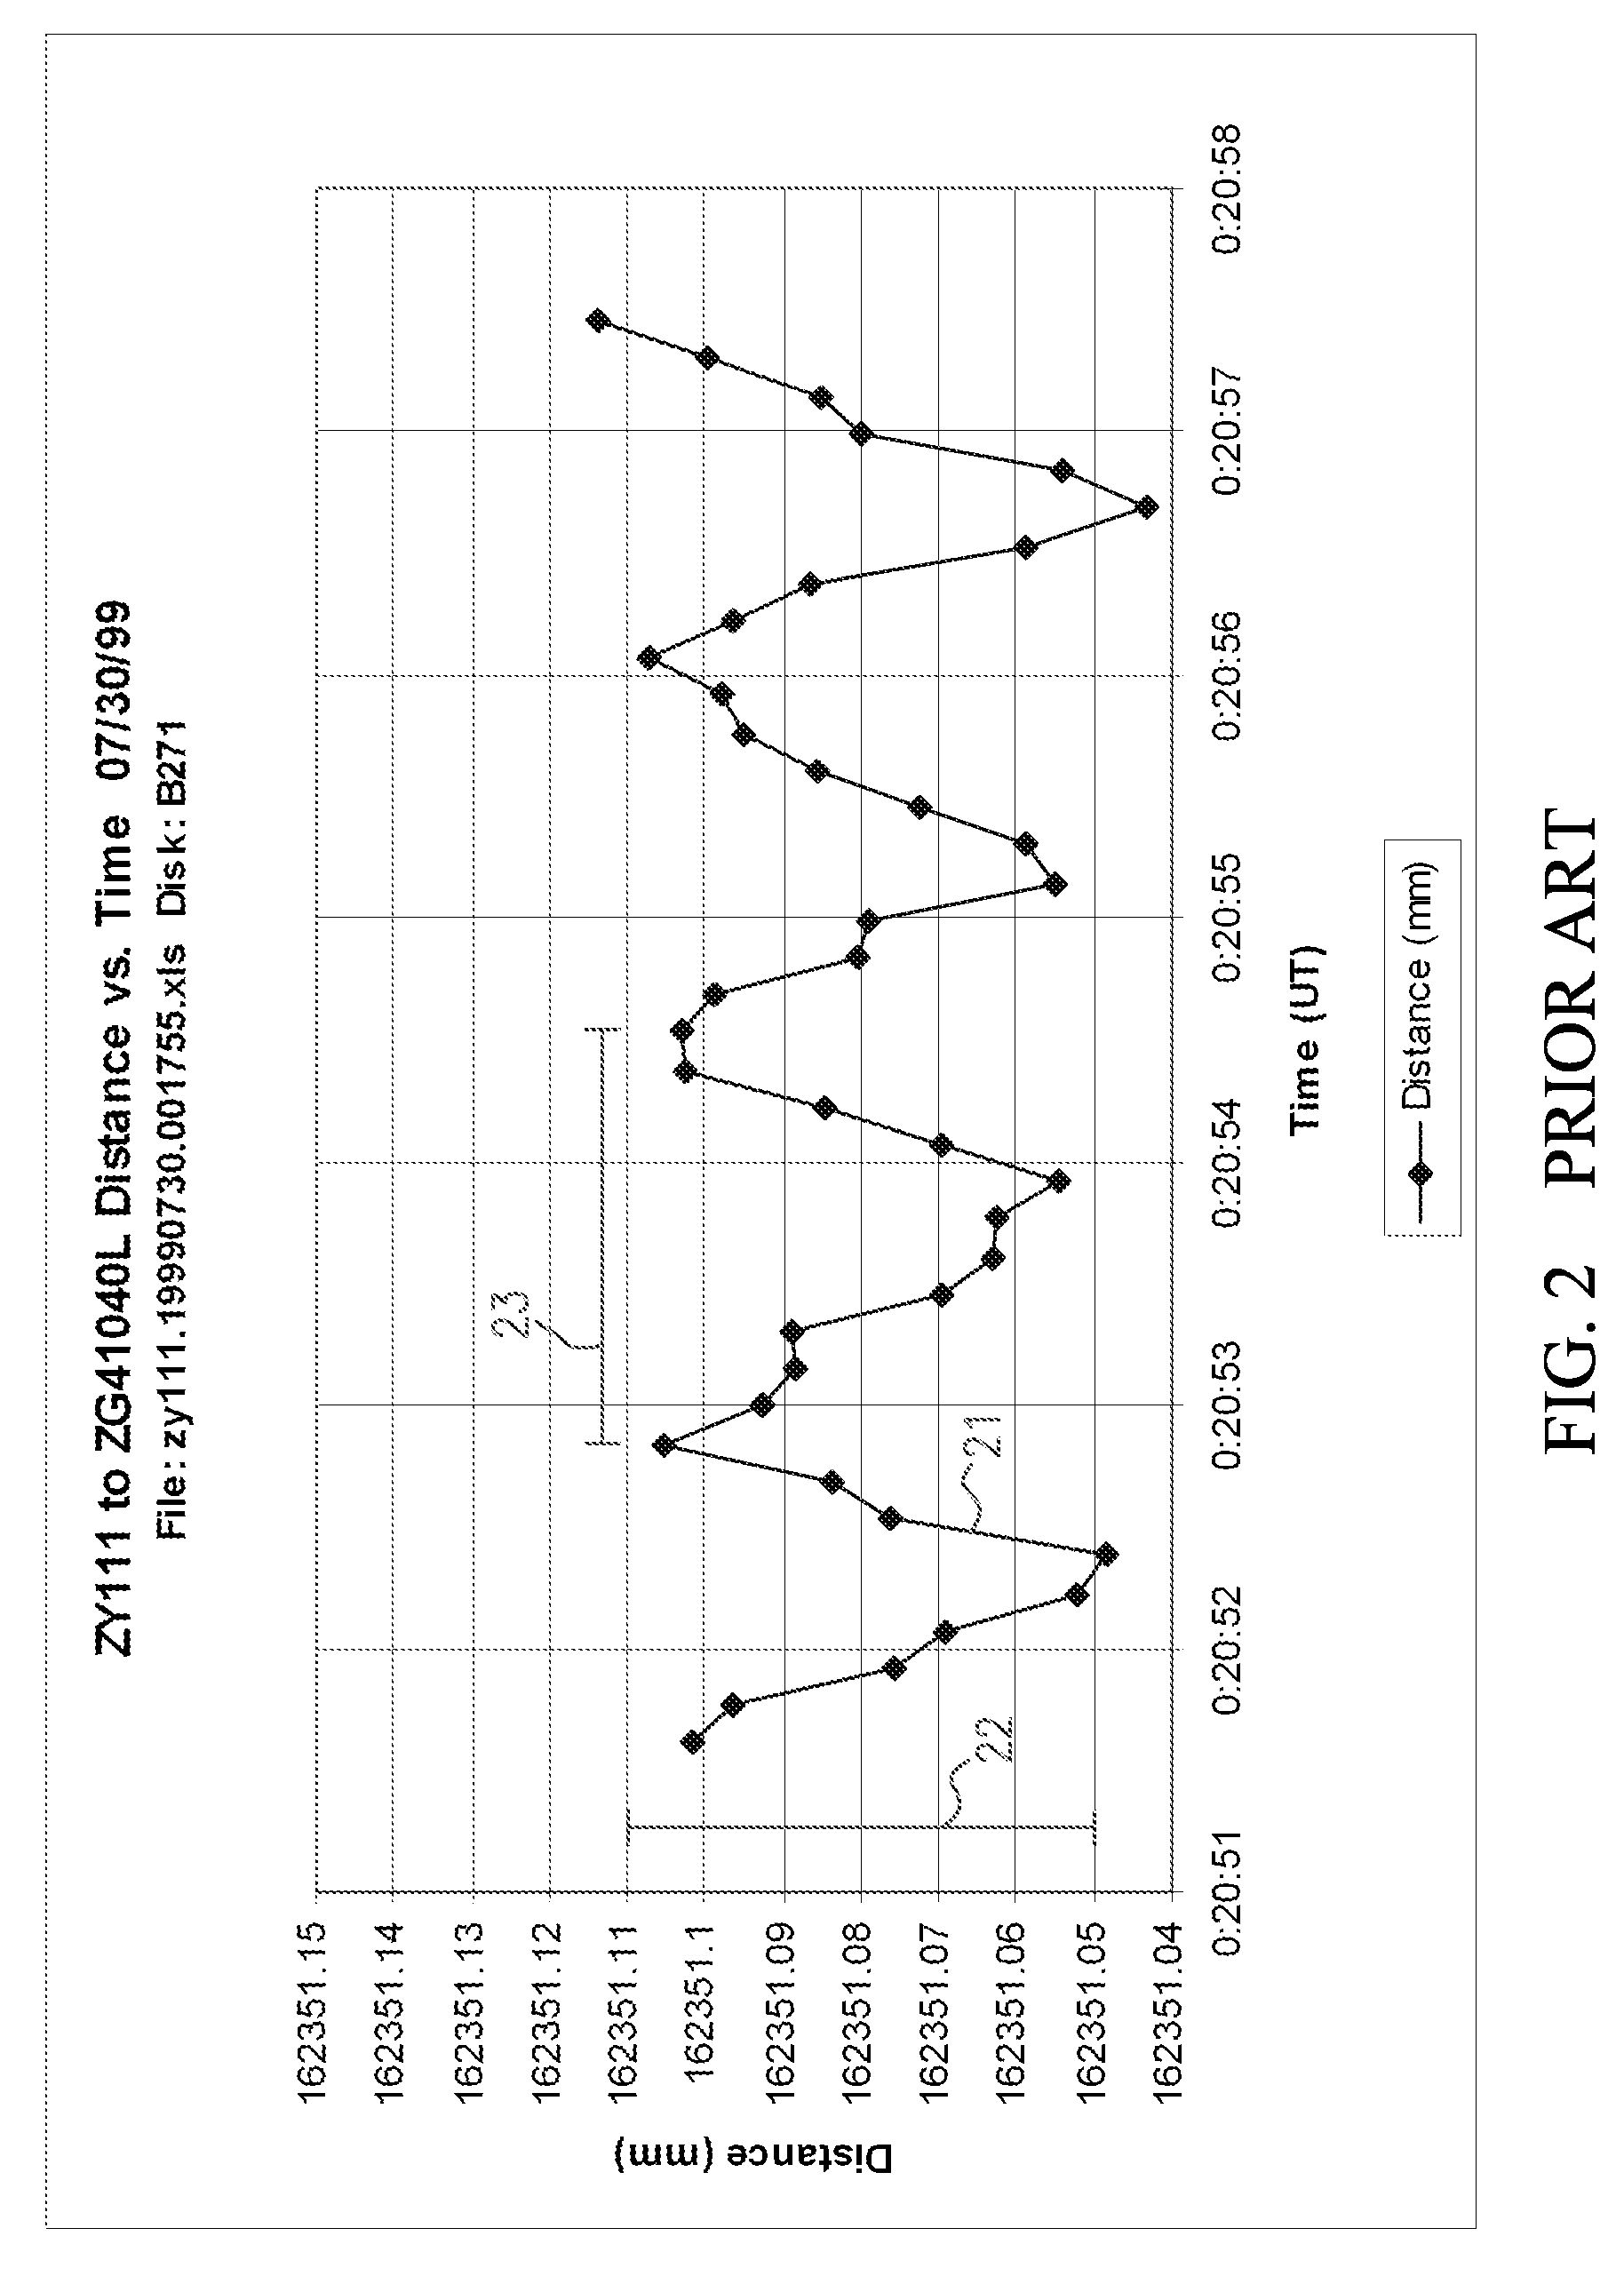 Method for measuring the structural health of a civil structure